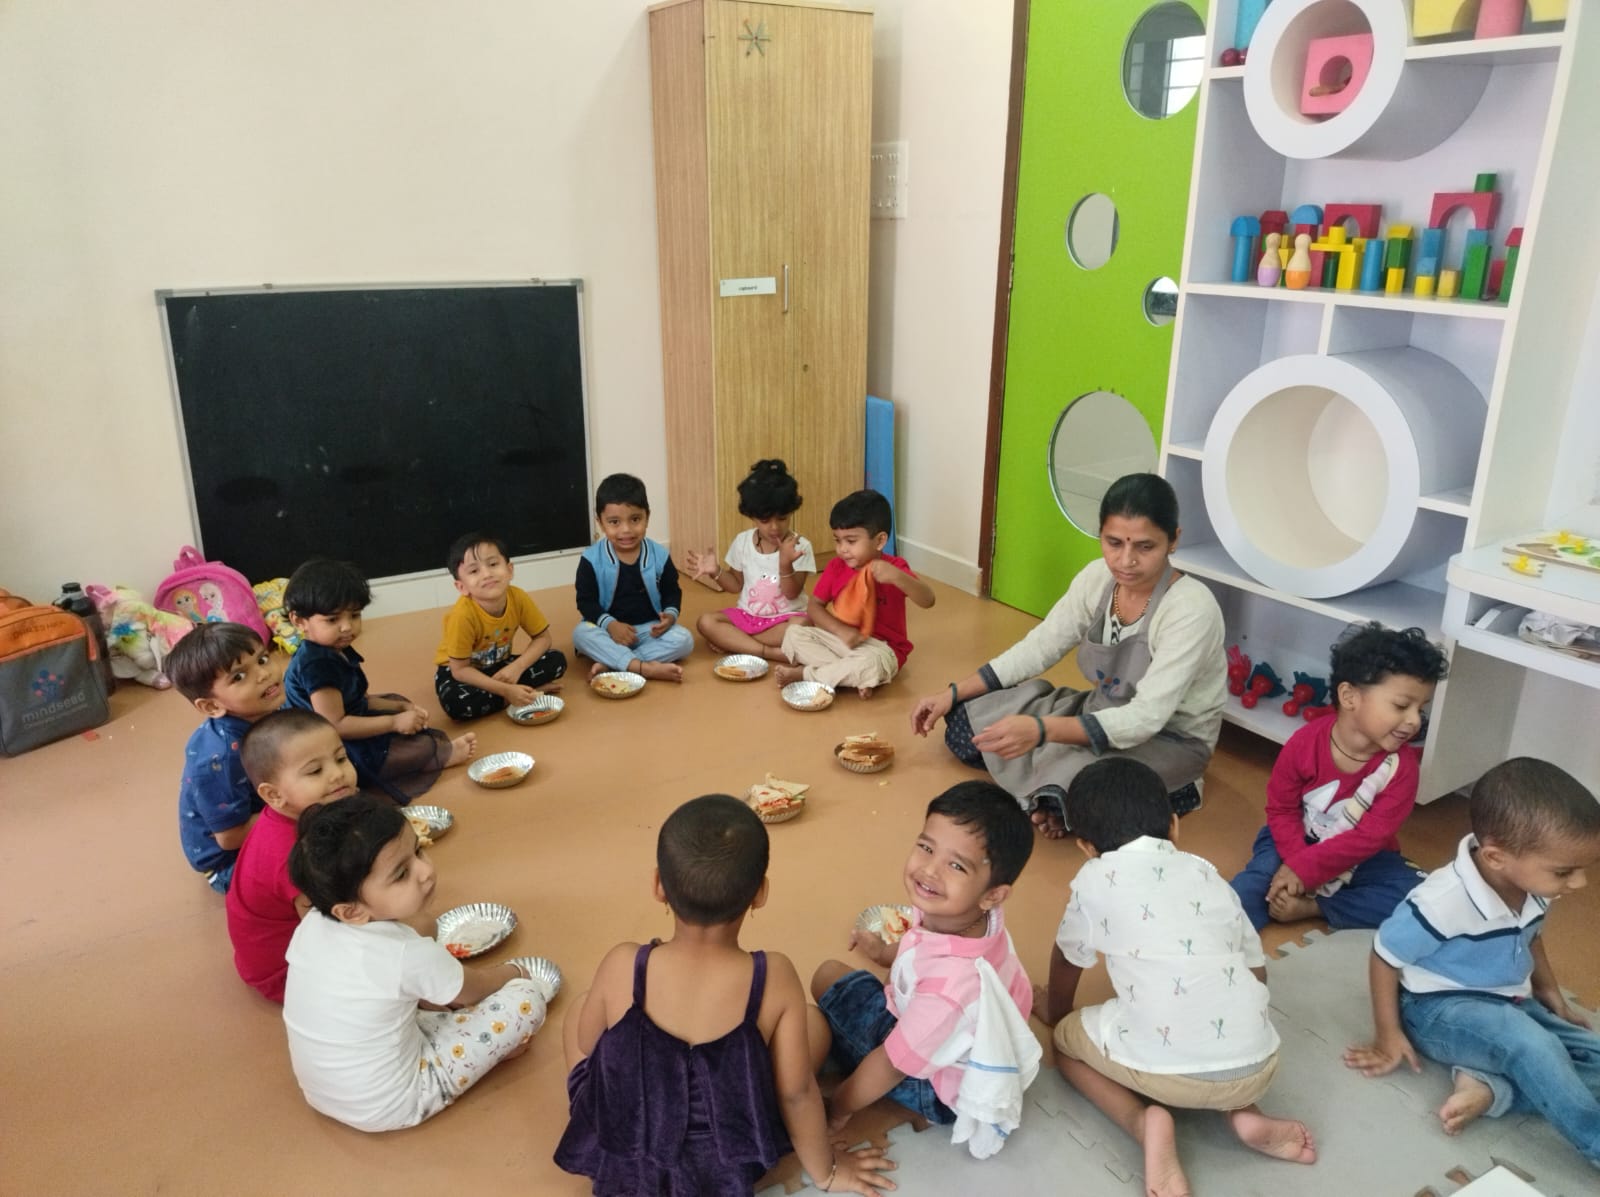 Benefits of Socialization in Daycare Centers for Child Development